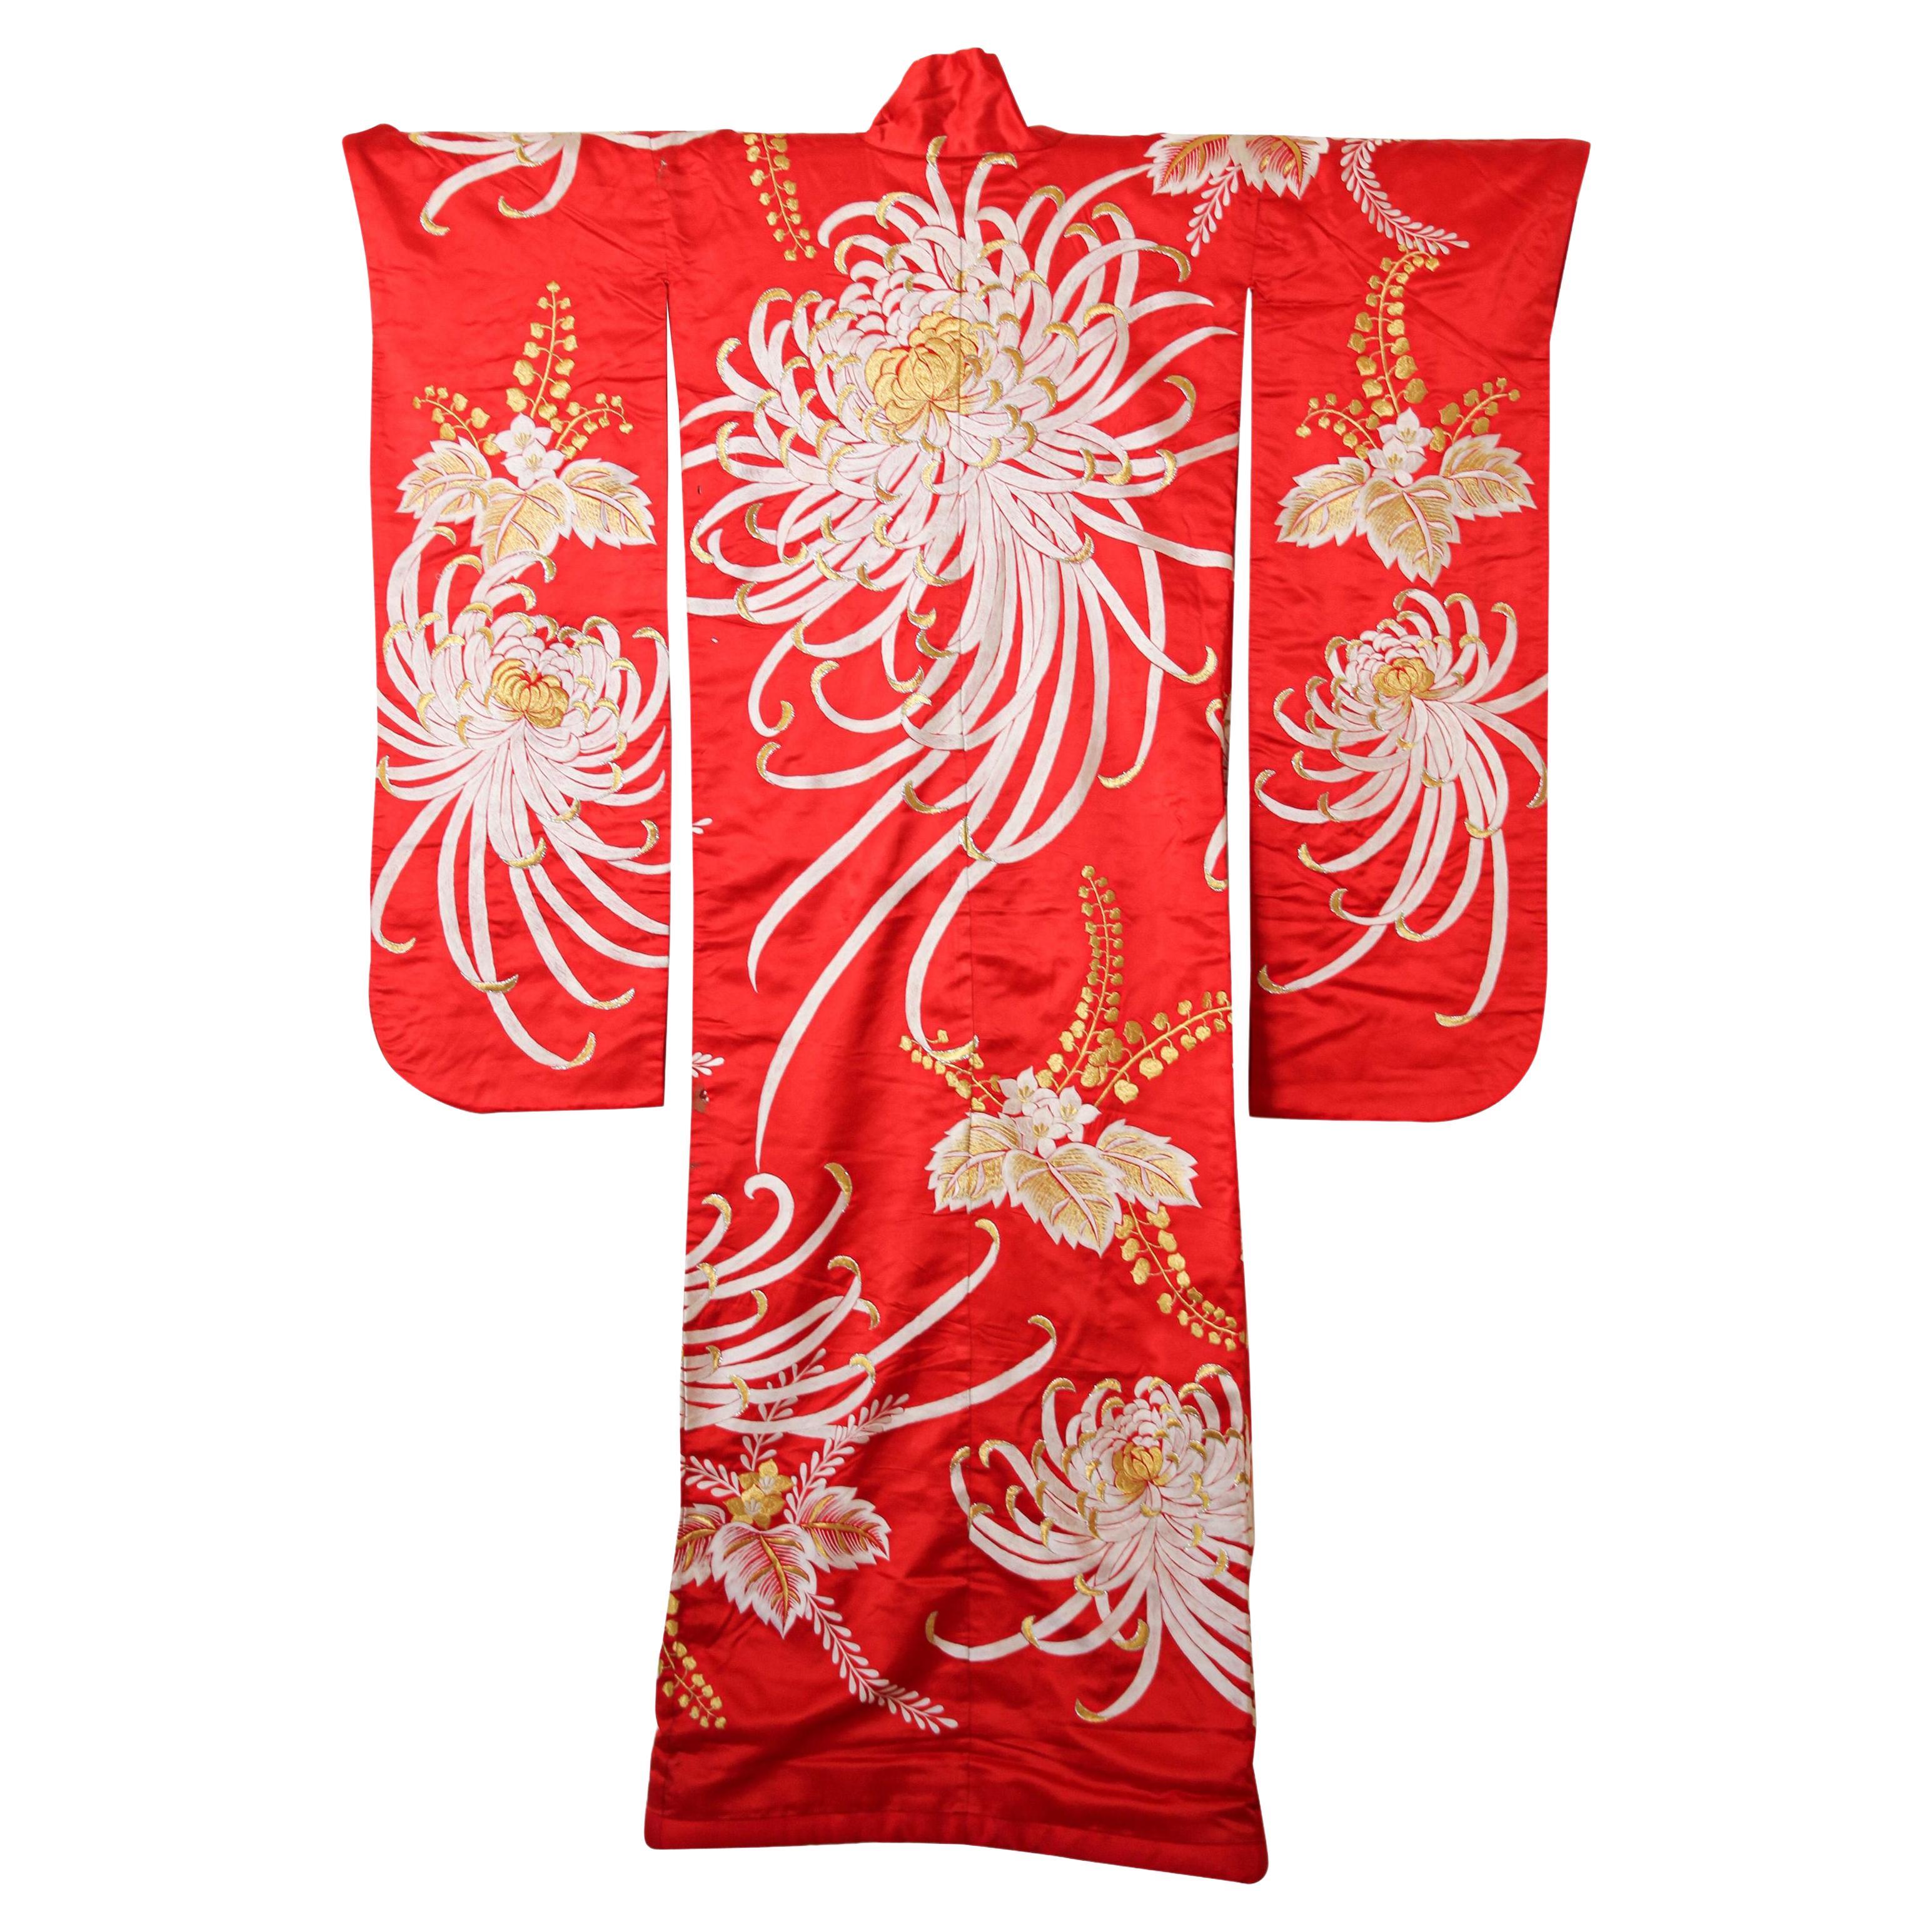 A vintage midcentury red color silk brocade collectable Japanese ceremonial wedding kimono. 
One of a kind handcrafted .
Fabulous museum quality ceremonial piece in pure silk with intricate detailed hand-embroidery throughout accented with gold lame